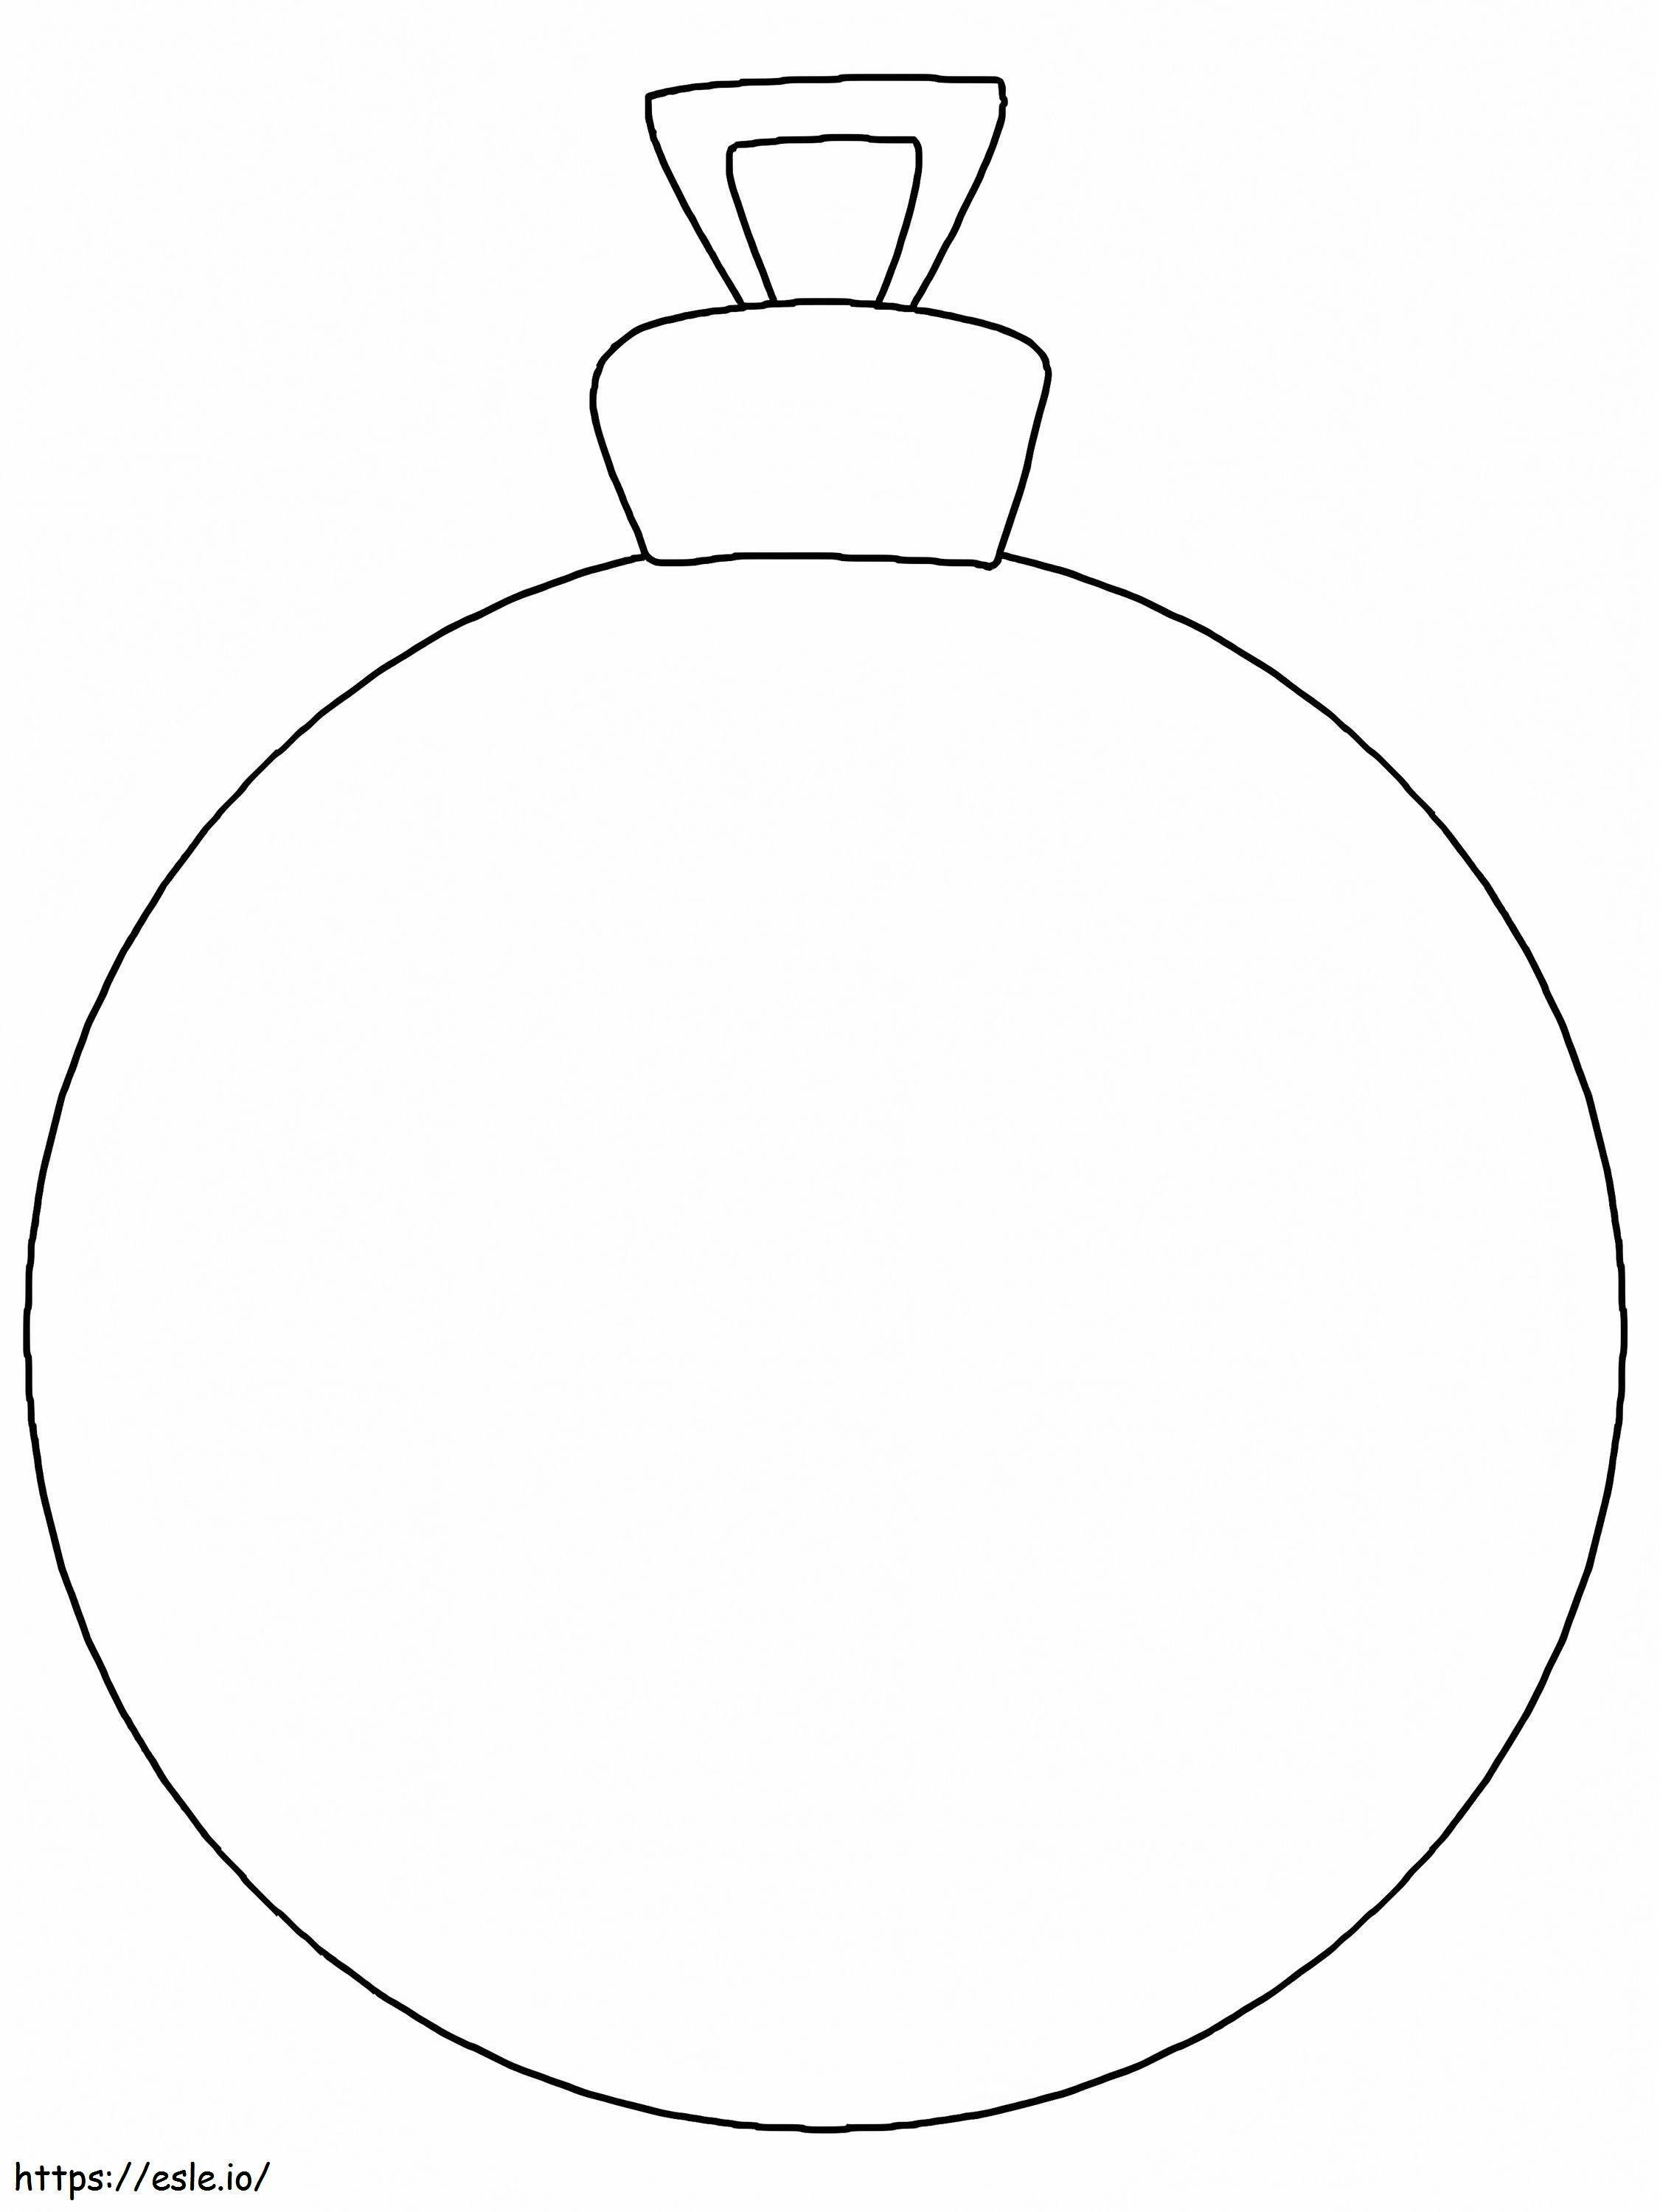 Simple Ornament coloring page